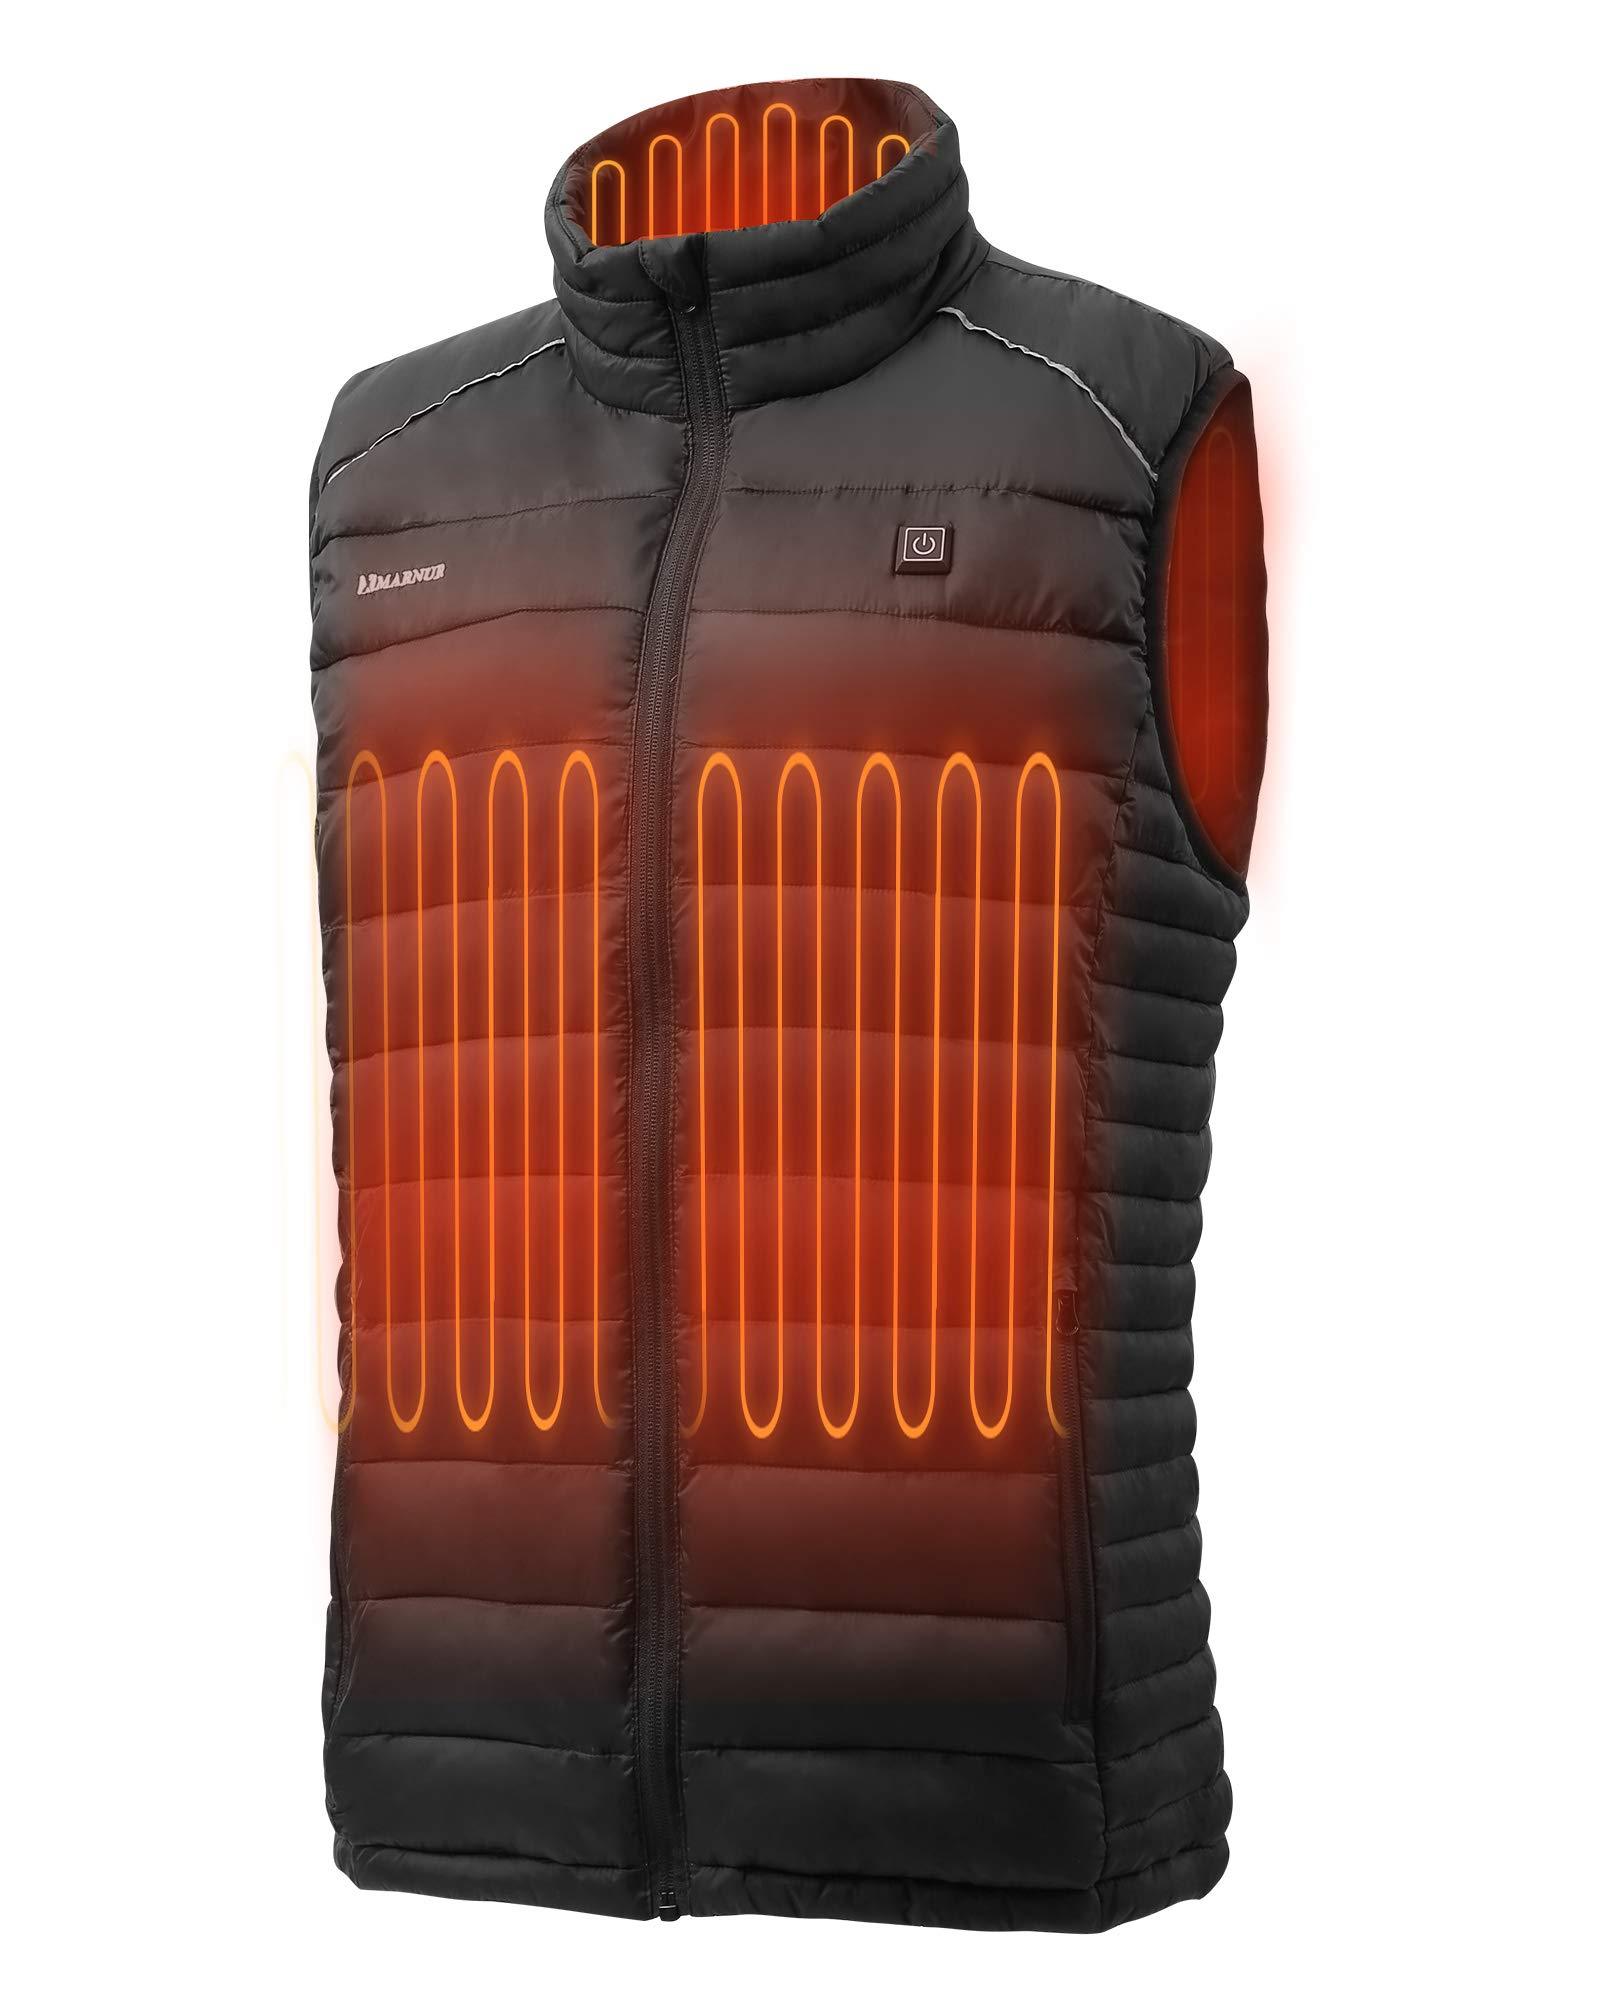 Load image into Gallery viewer, Heated Vest, Lightweight Outdoor Clothing with Battery Pack, 4 Large Heating Panels - NAIPO
